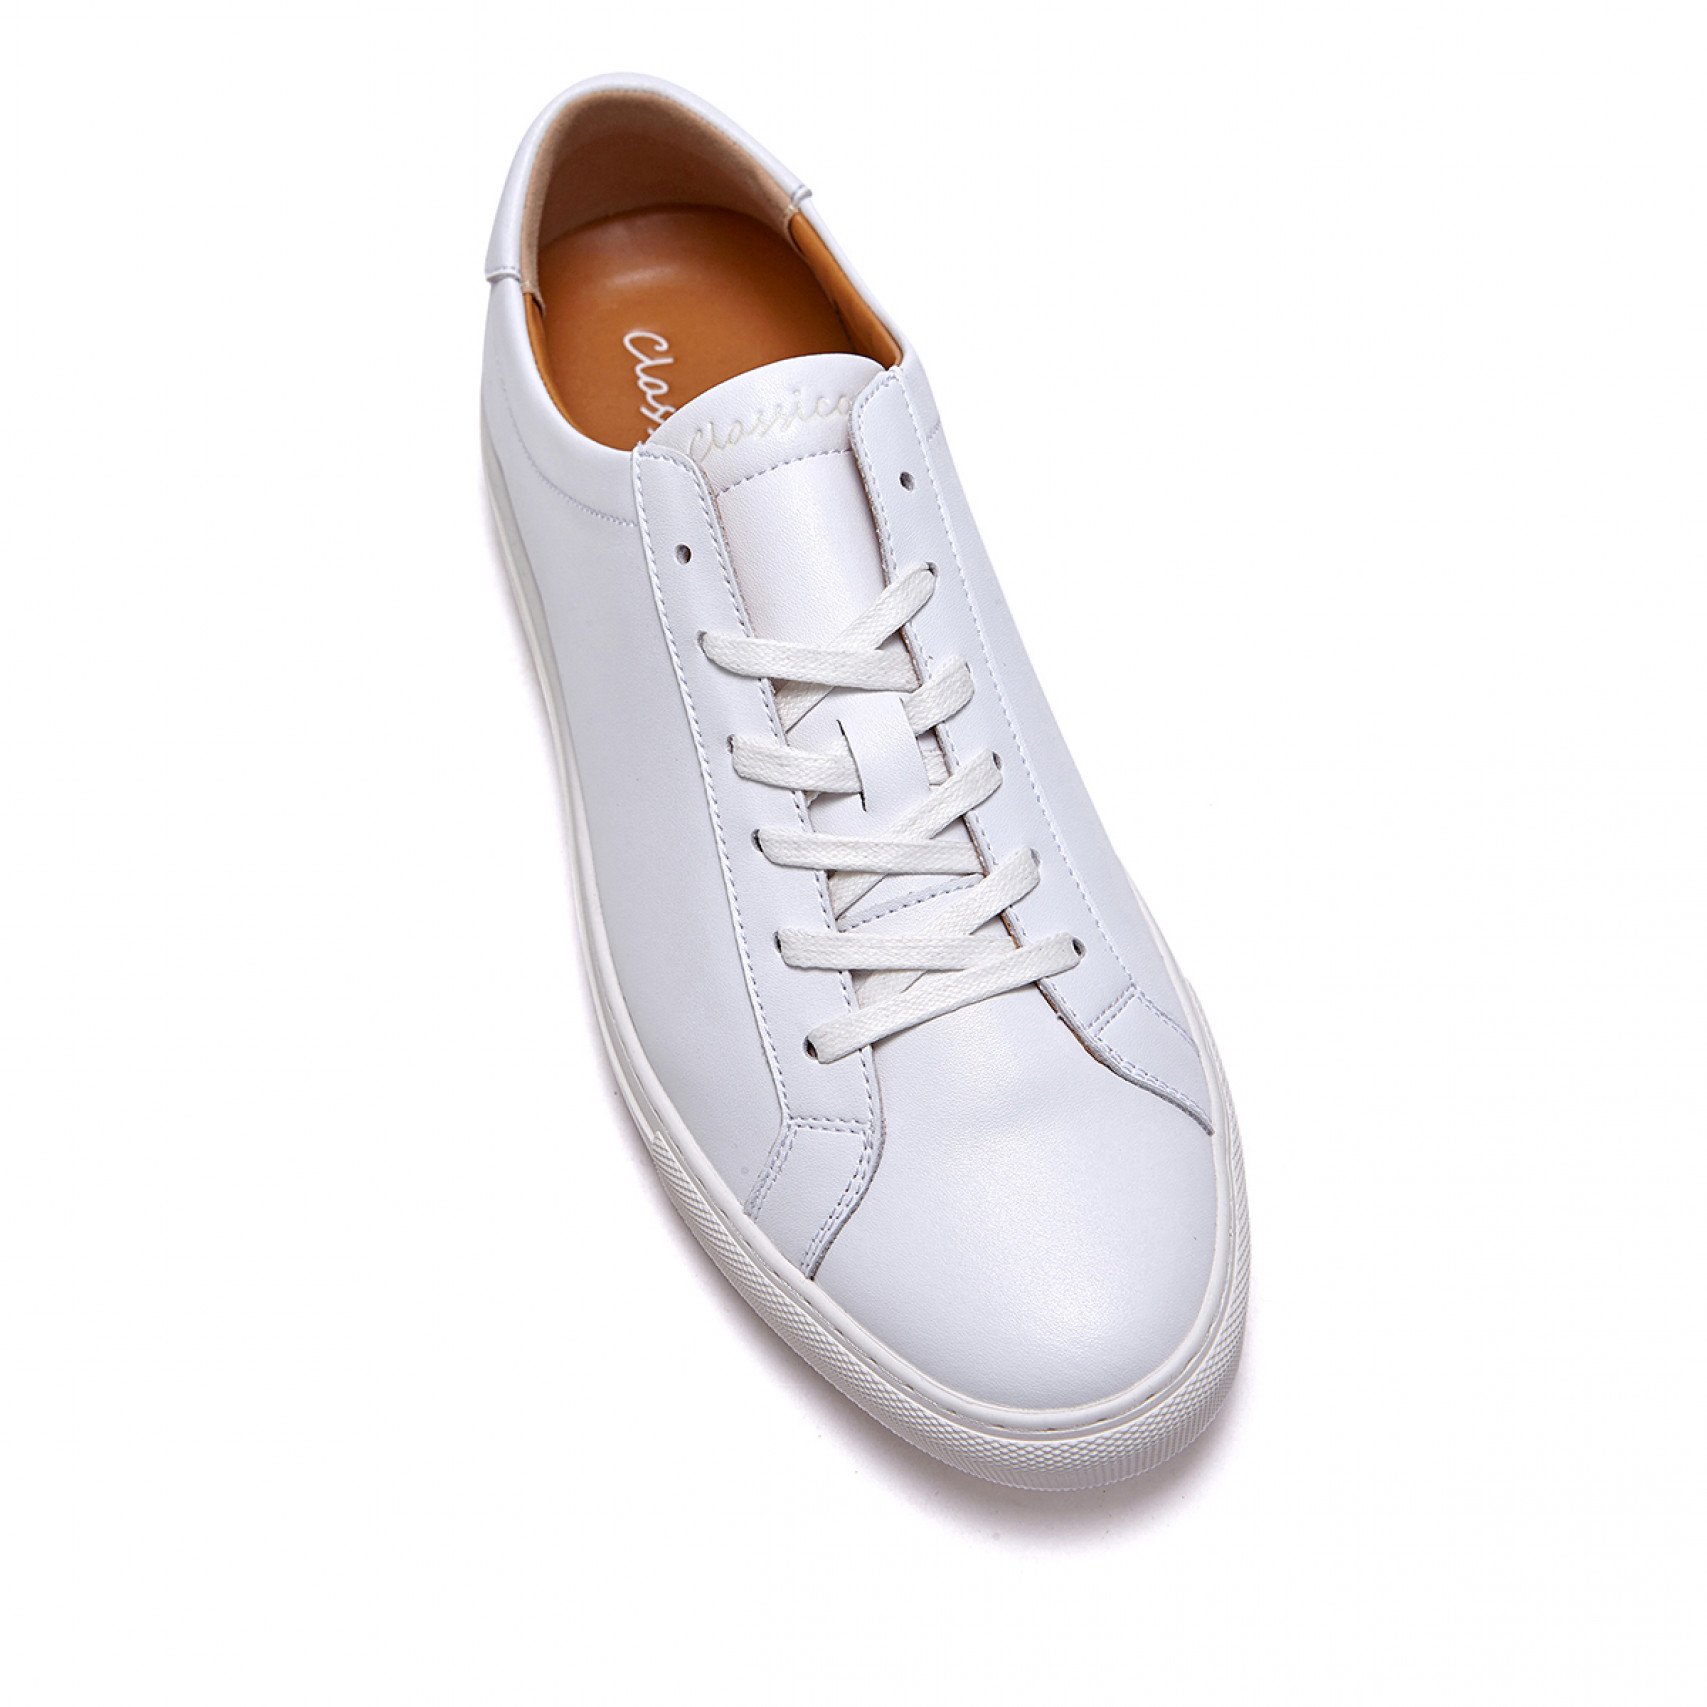 Classic Leather Sneakers Ver2